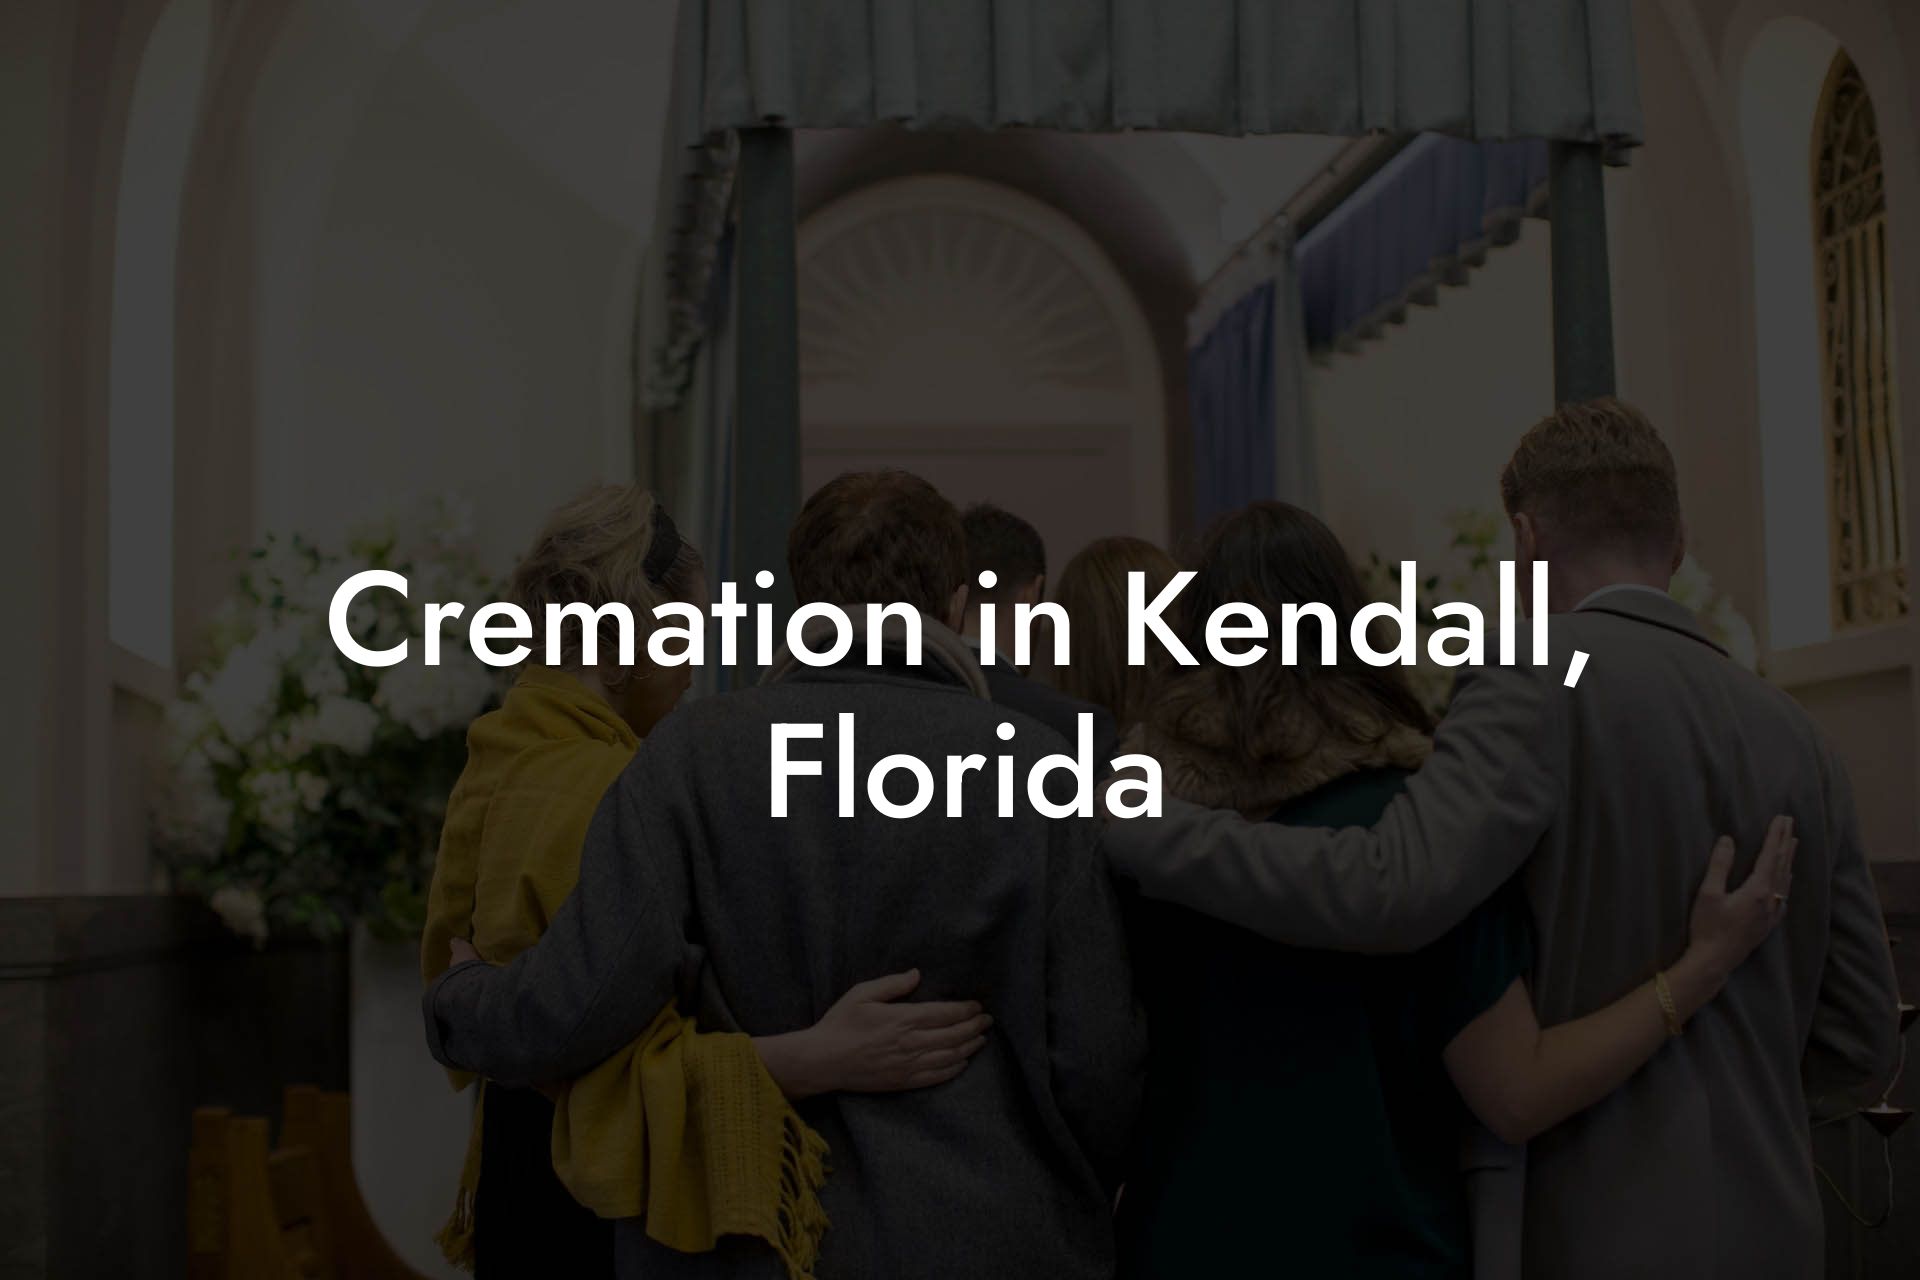 Cremation in Kendall, Florida